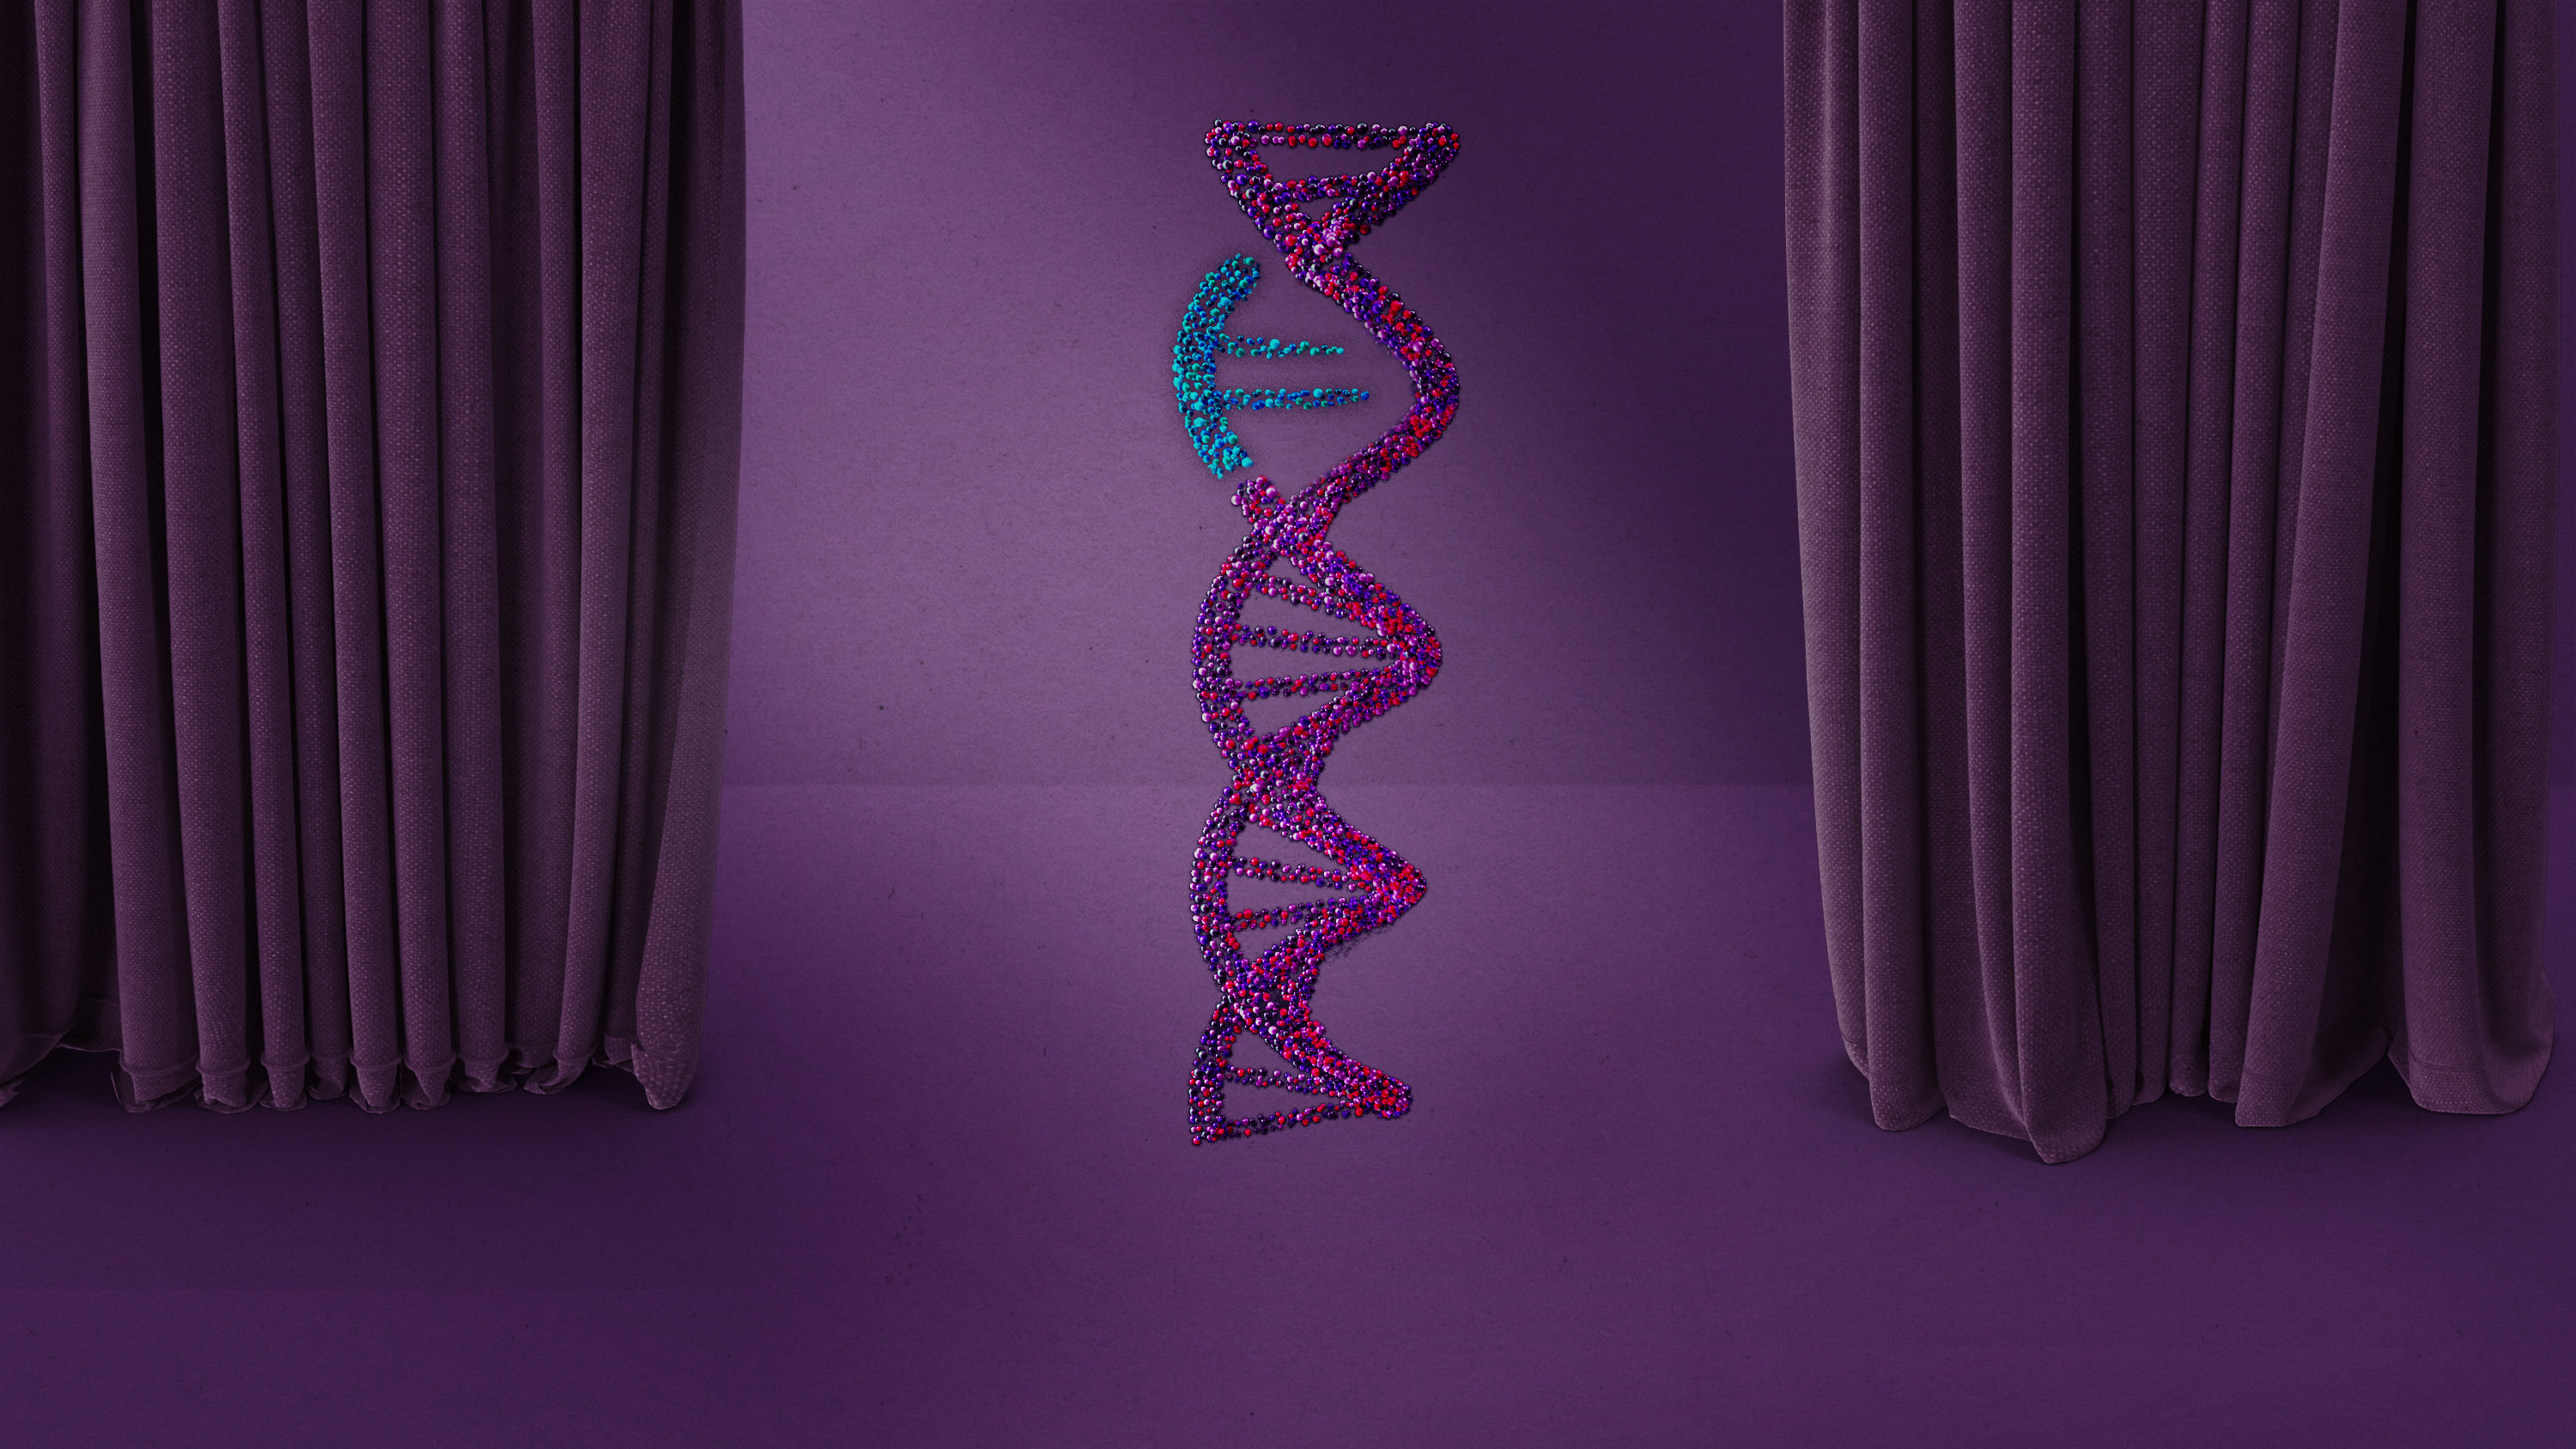 an altered strand of DNA spotlight on a purple stage with theatrical curtains